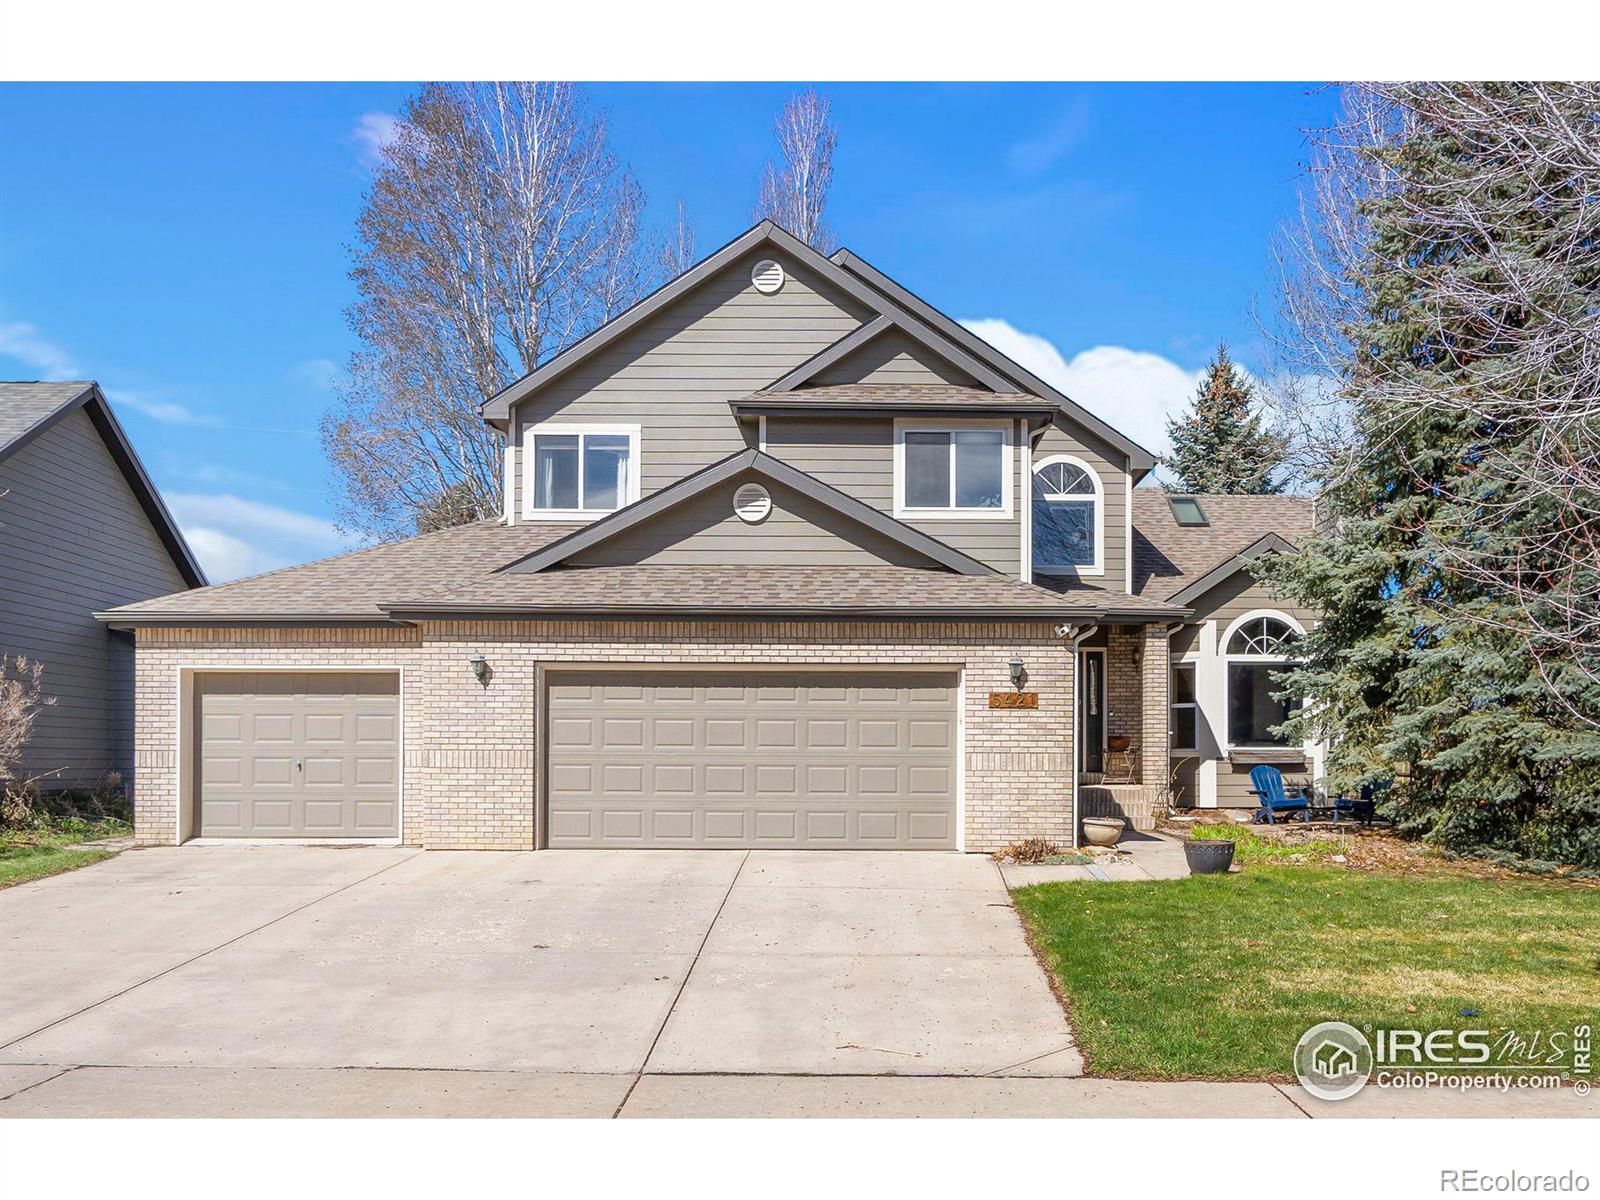 5421  Golden Willow Drive, fort collins MLS: 4567891006554 Beds: 4 Baths: 4 Price: $849,000